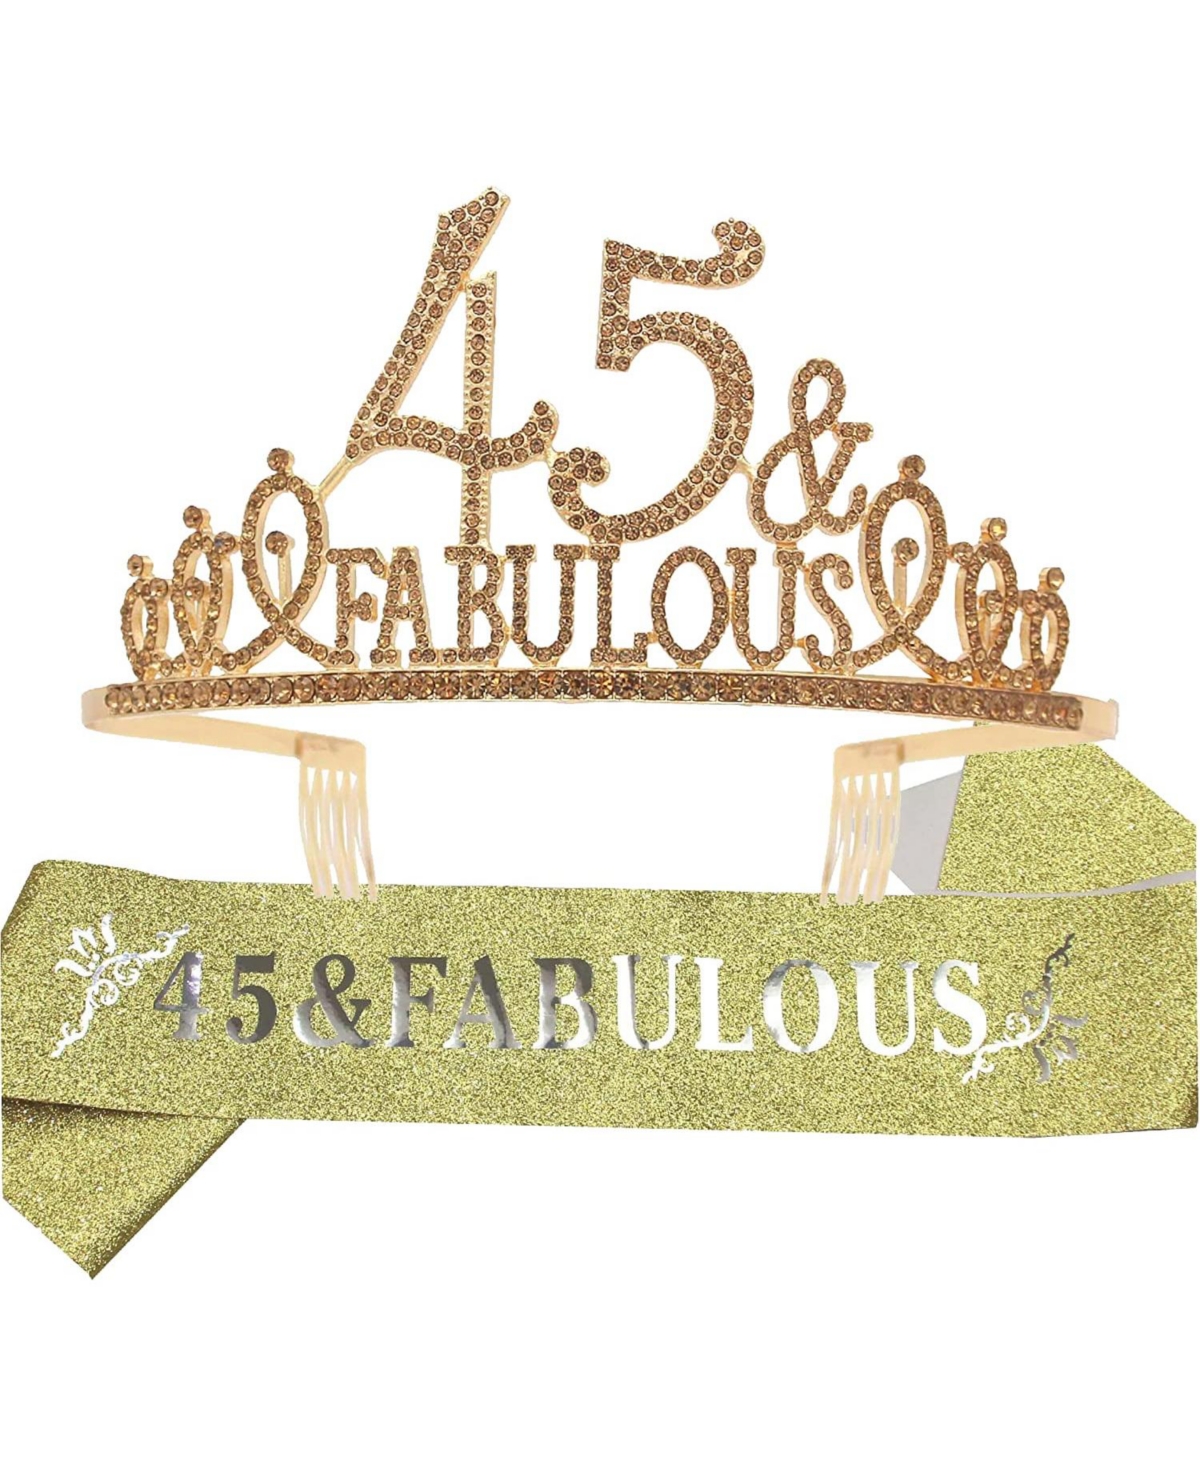 45th Birthday Sash and Tiara Set for Women - Glittery Sash and Sparkling Rhinestone Metal Tiara, Perfect 45th Birthday Party Gifts and Accessories - S